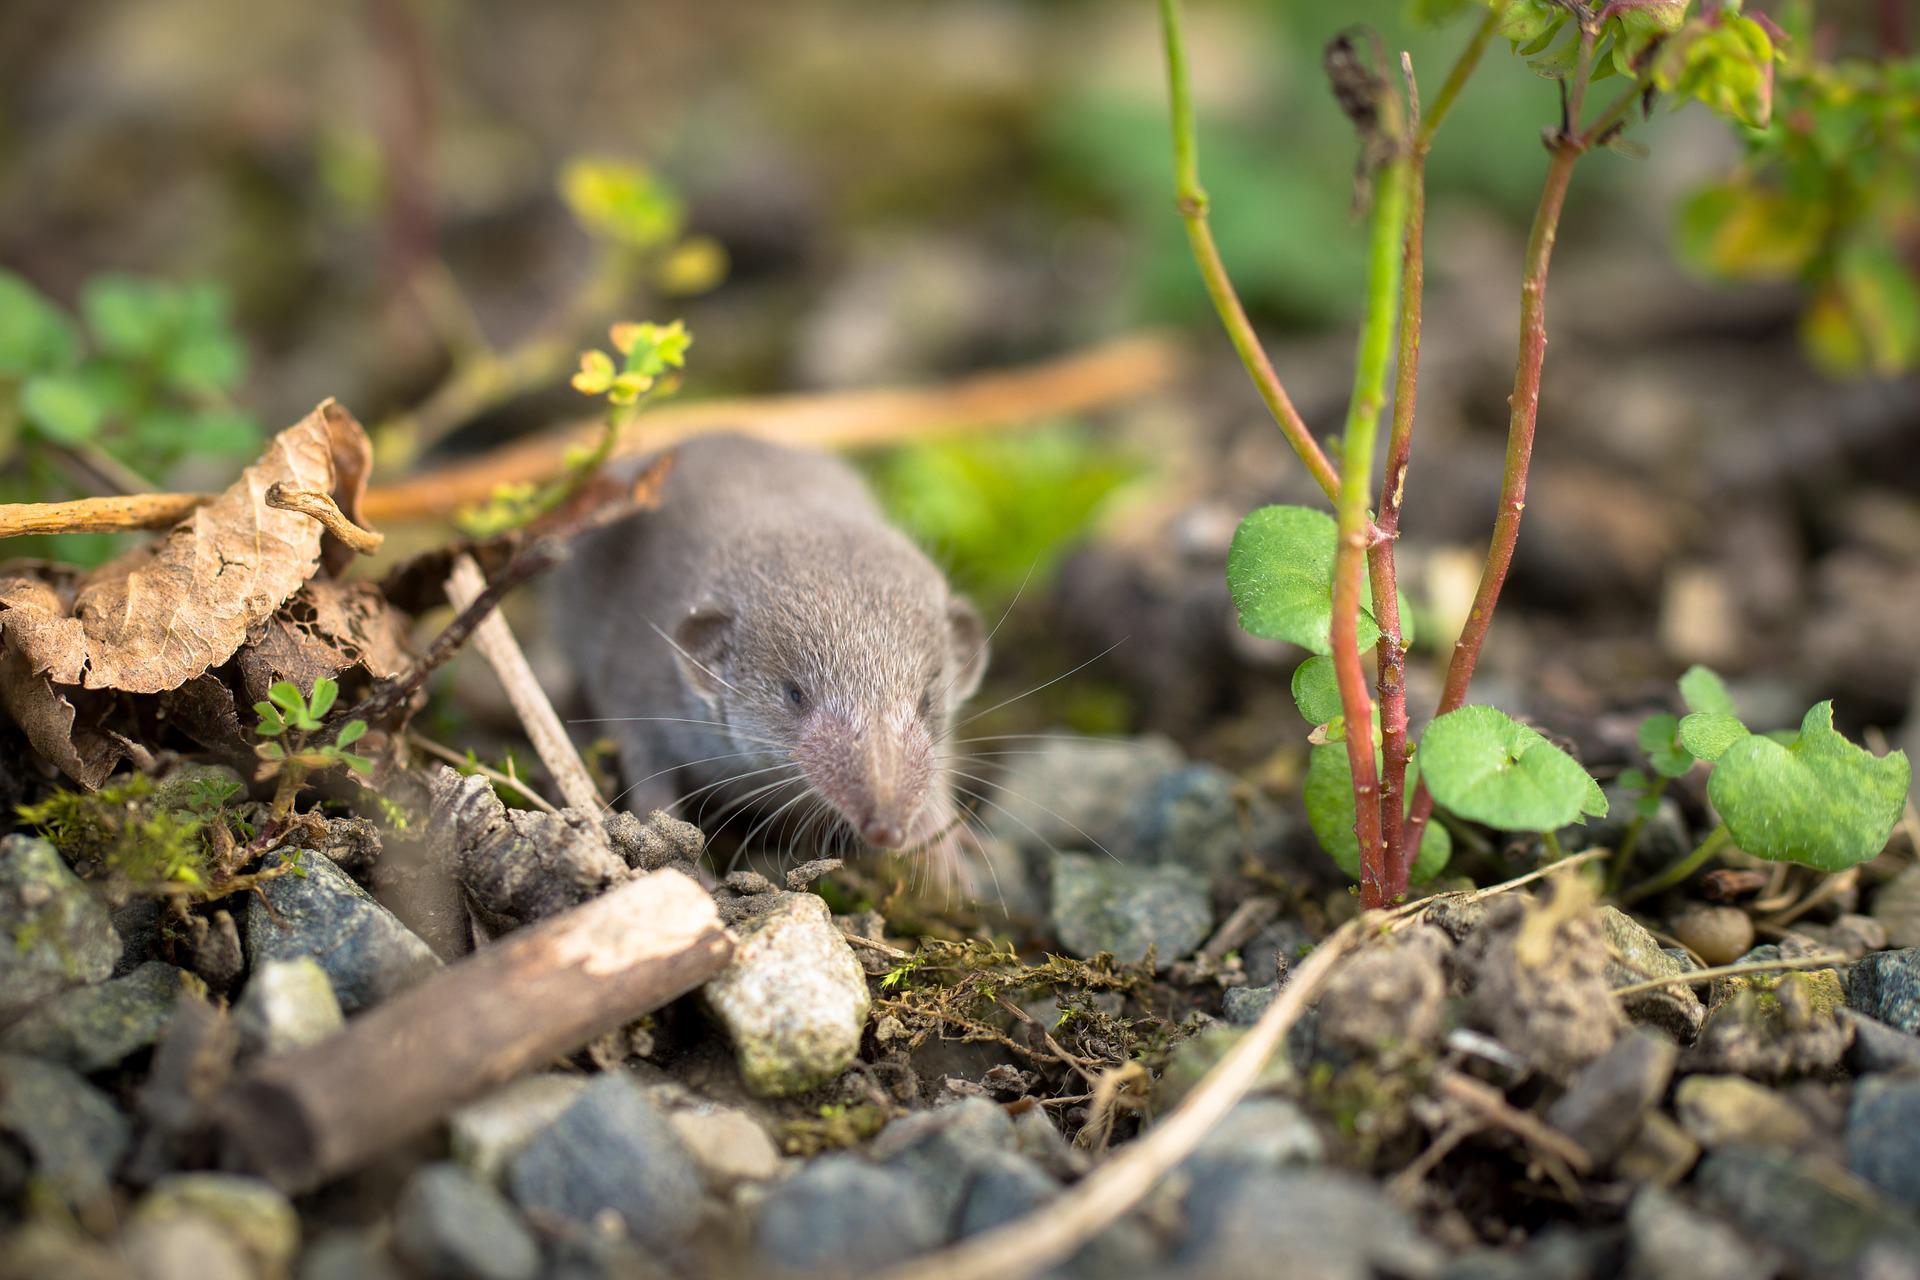 Newly discovered Langya virus may have jumped from shrews to humans